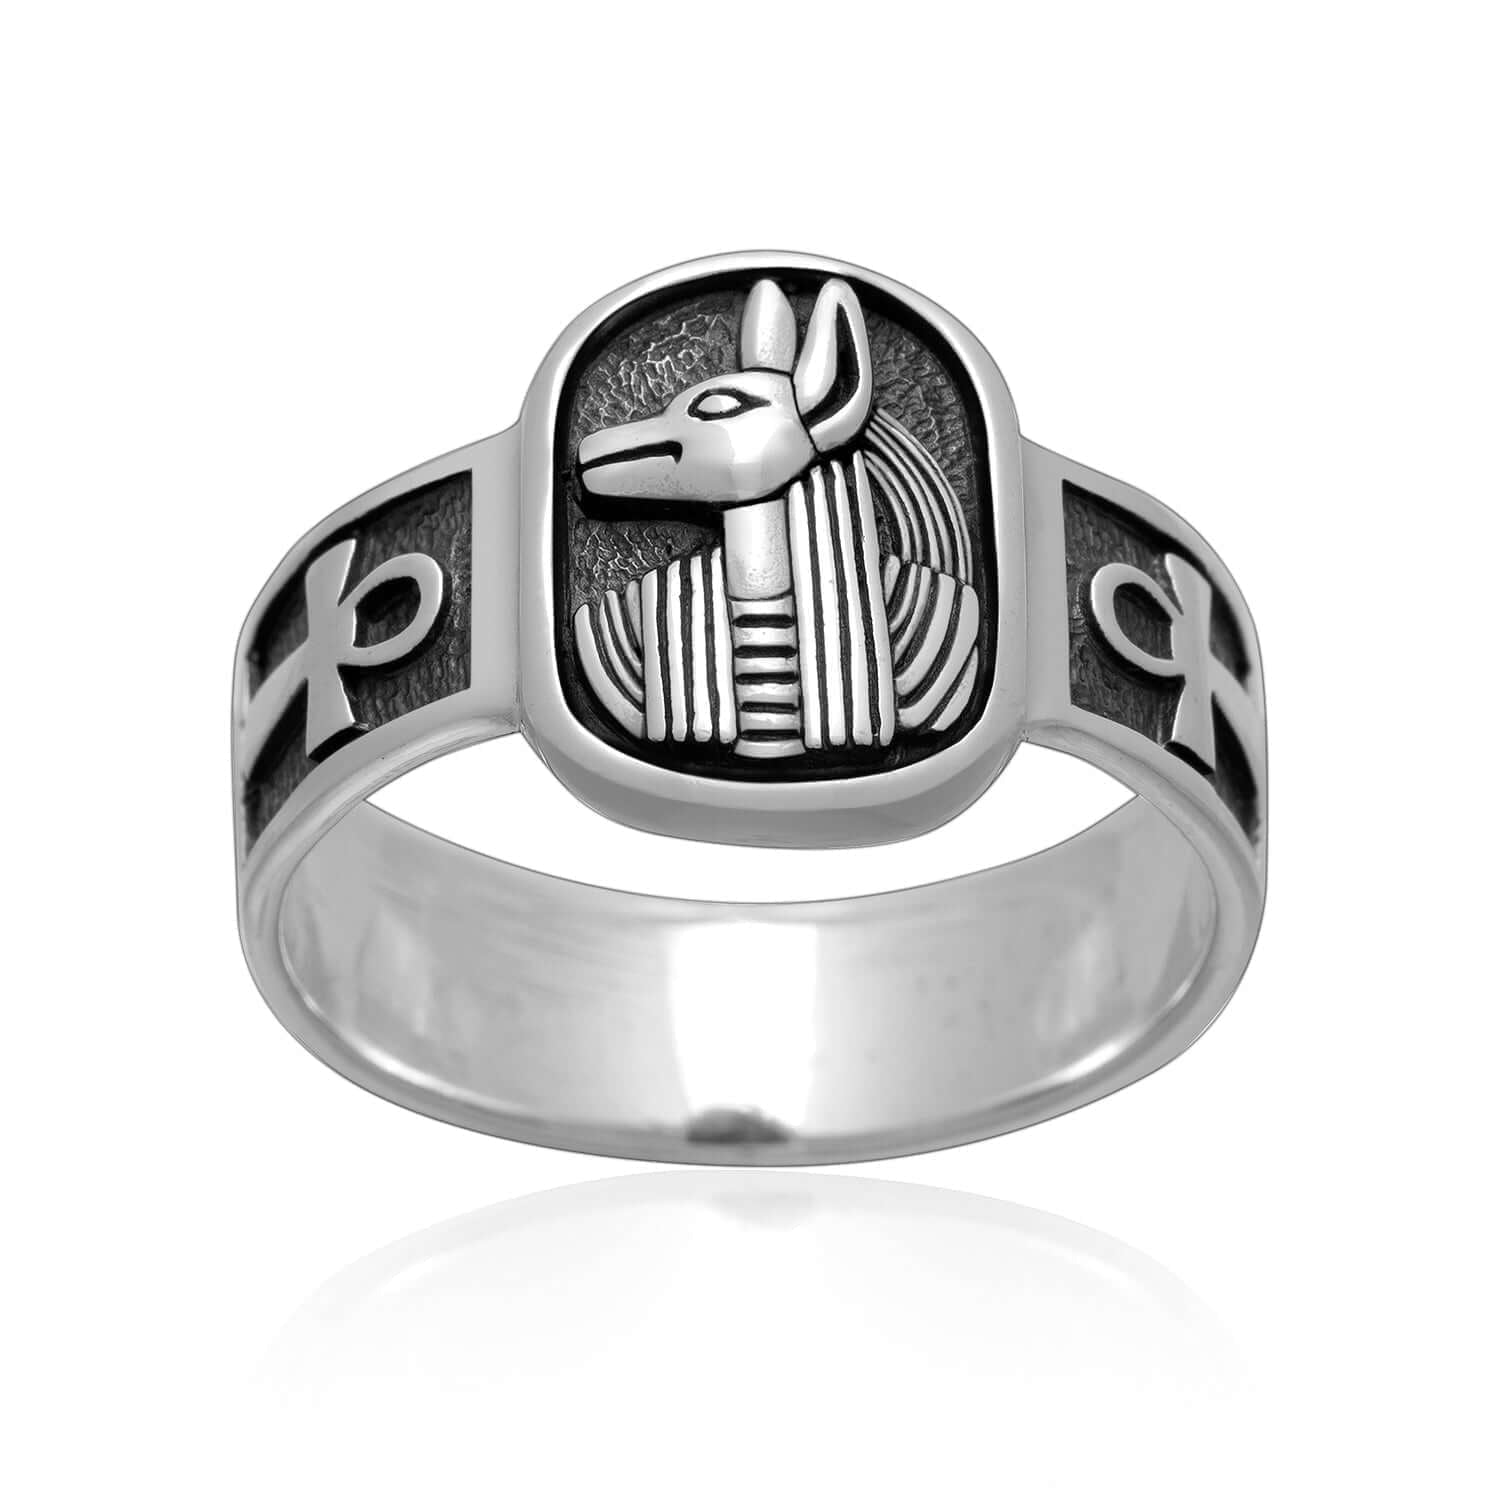 925 Sterling Silver Egyptian God Anubis Ring